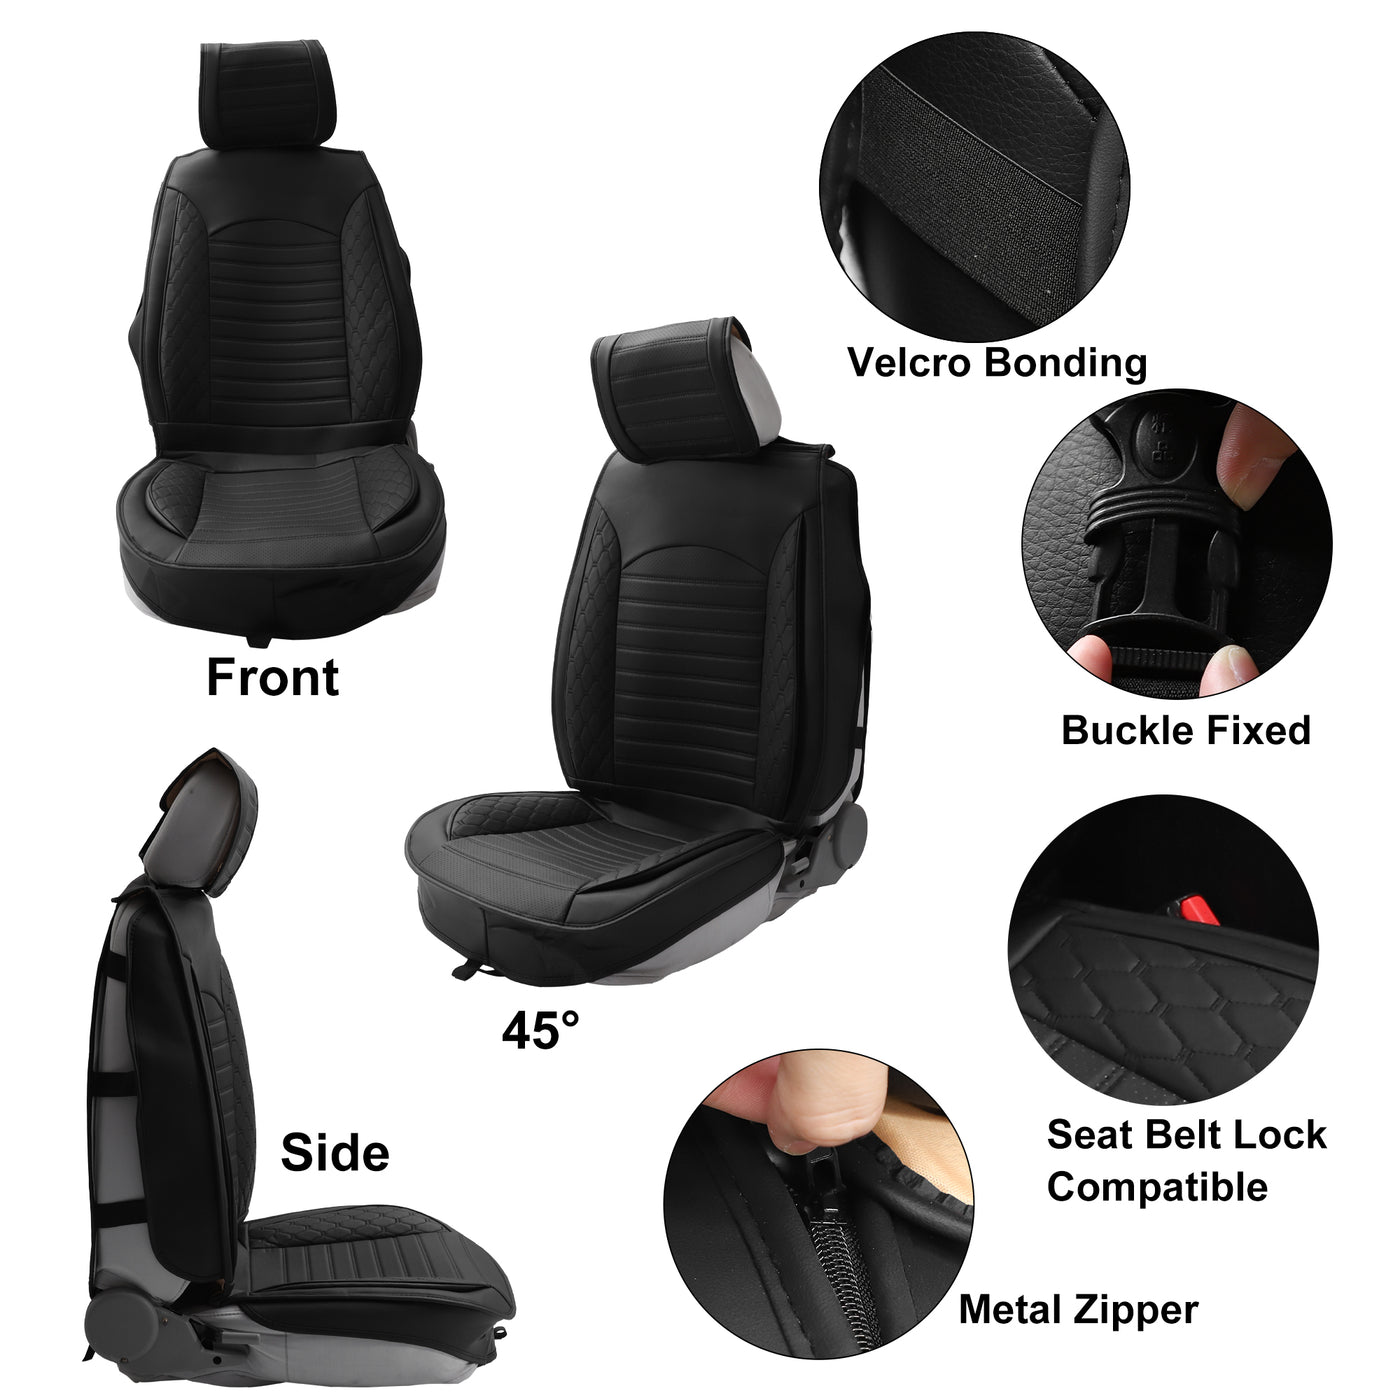 ACROPIX Full Set Universal Leather Car Seat Covers Seat Cushion Protectors for 5 Seat SUV Pick-up Truck Vehicle Interior Accessories Waterproof Non-Slip Black - Pack of 11